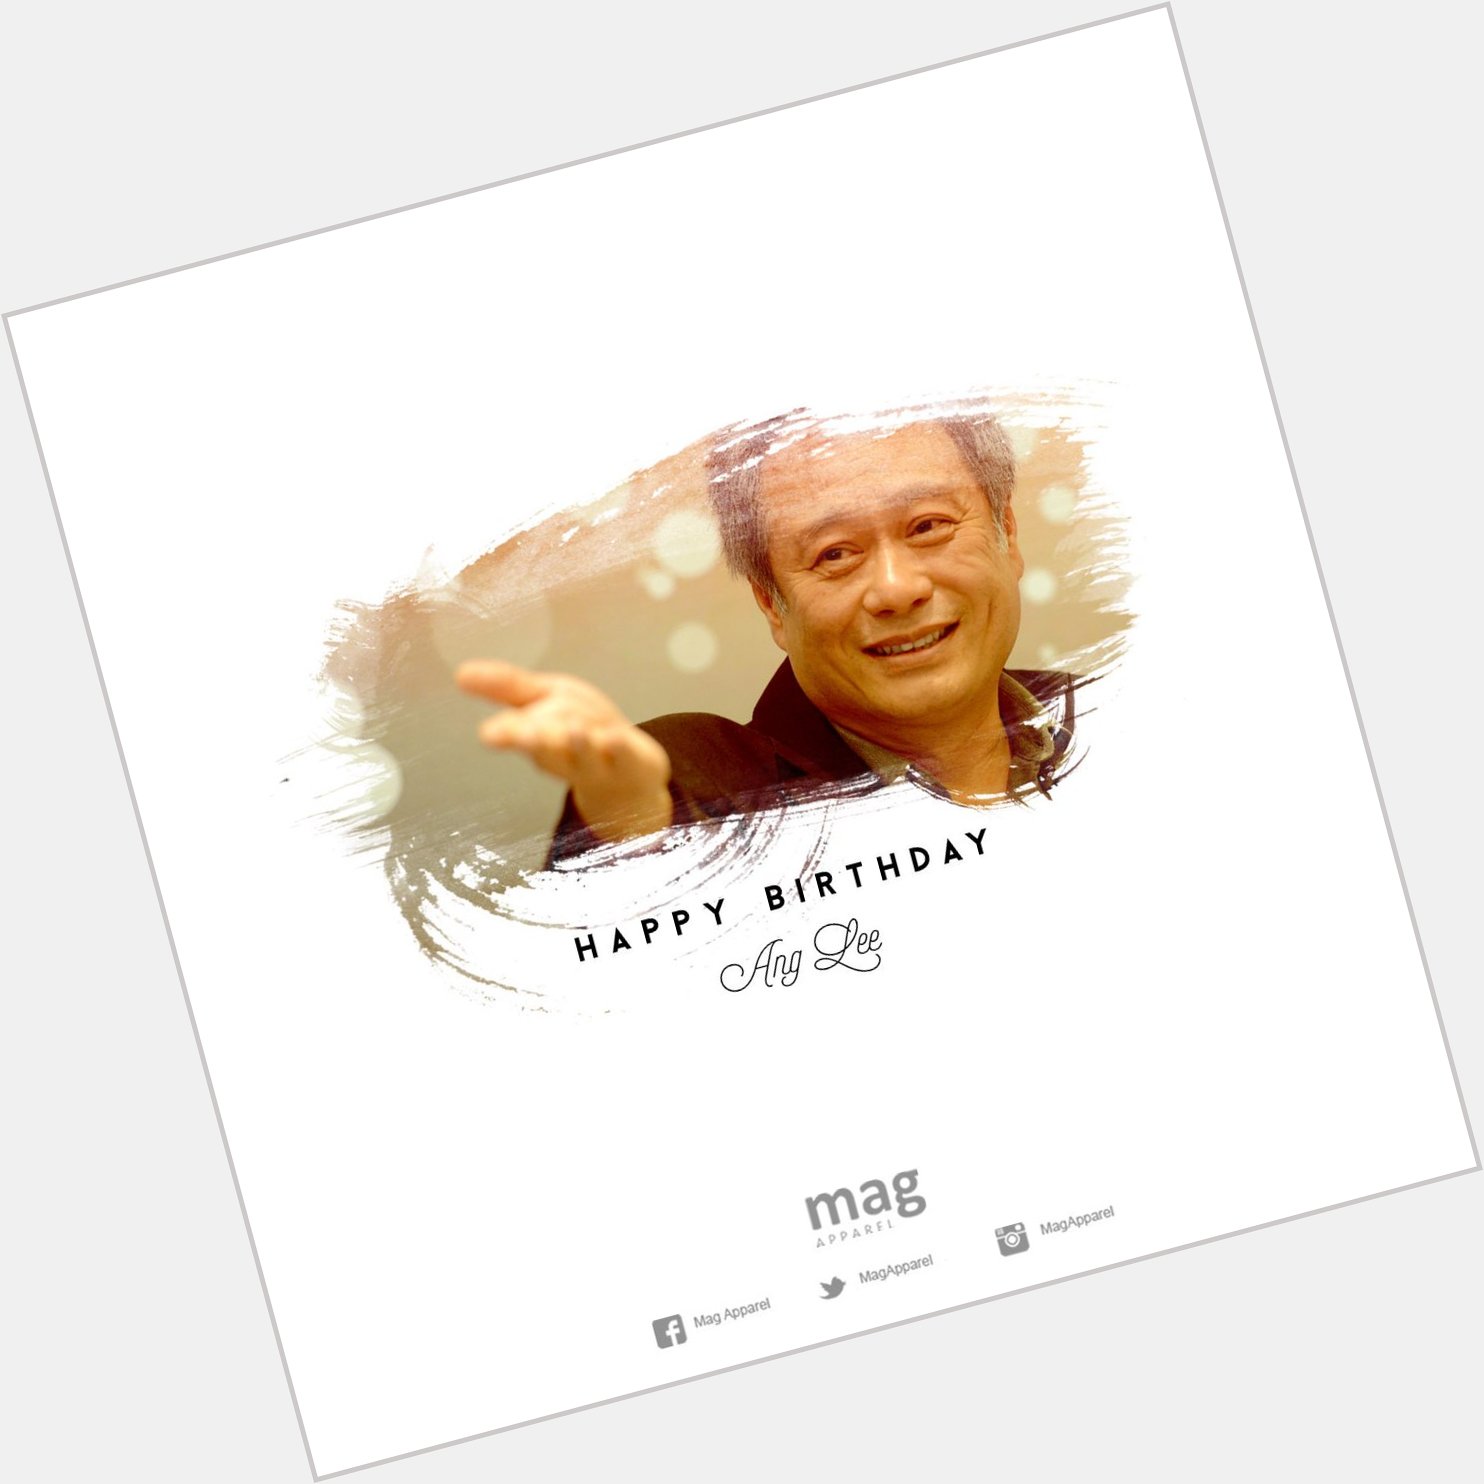 Happy Birthday Ang Lee!!
Stay awesome and we\ll wait your another good movies! 